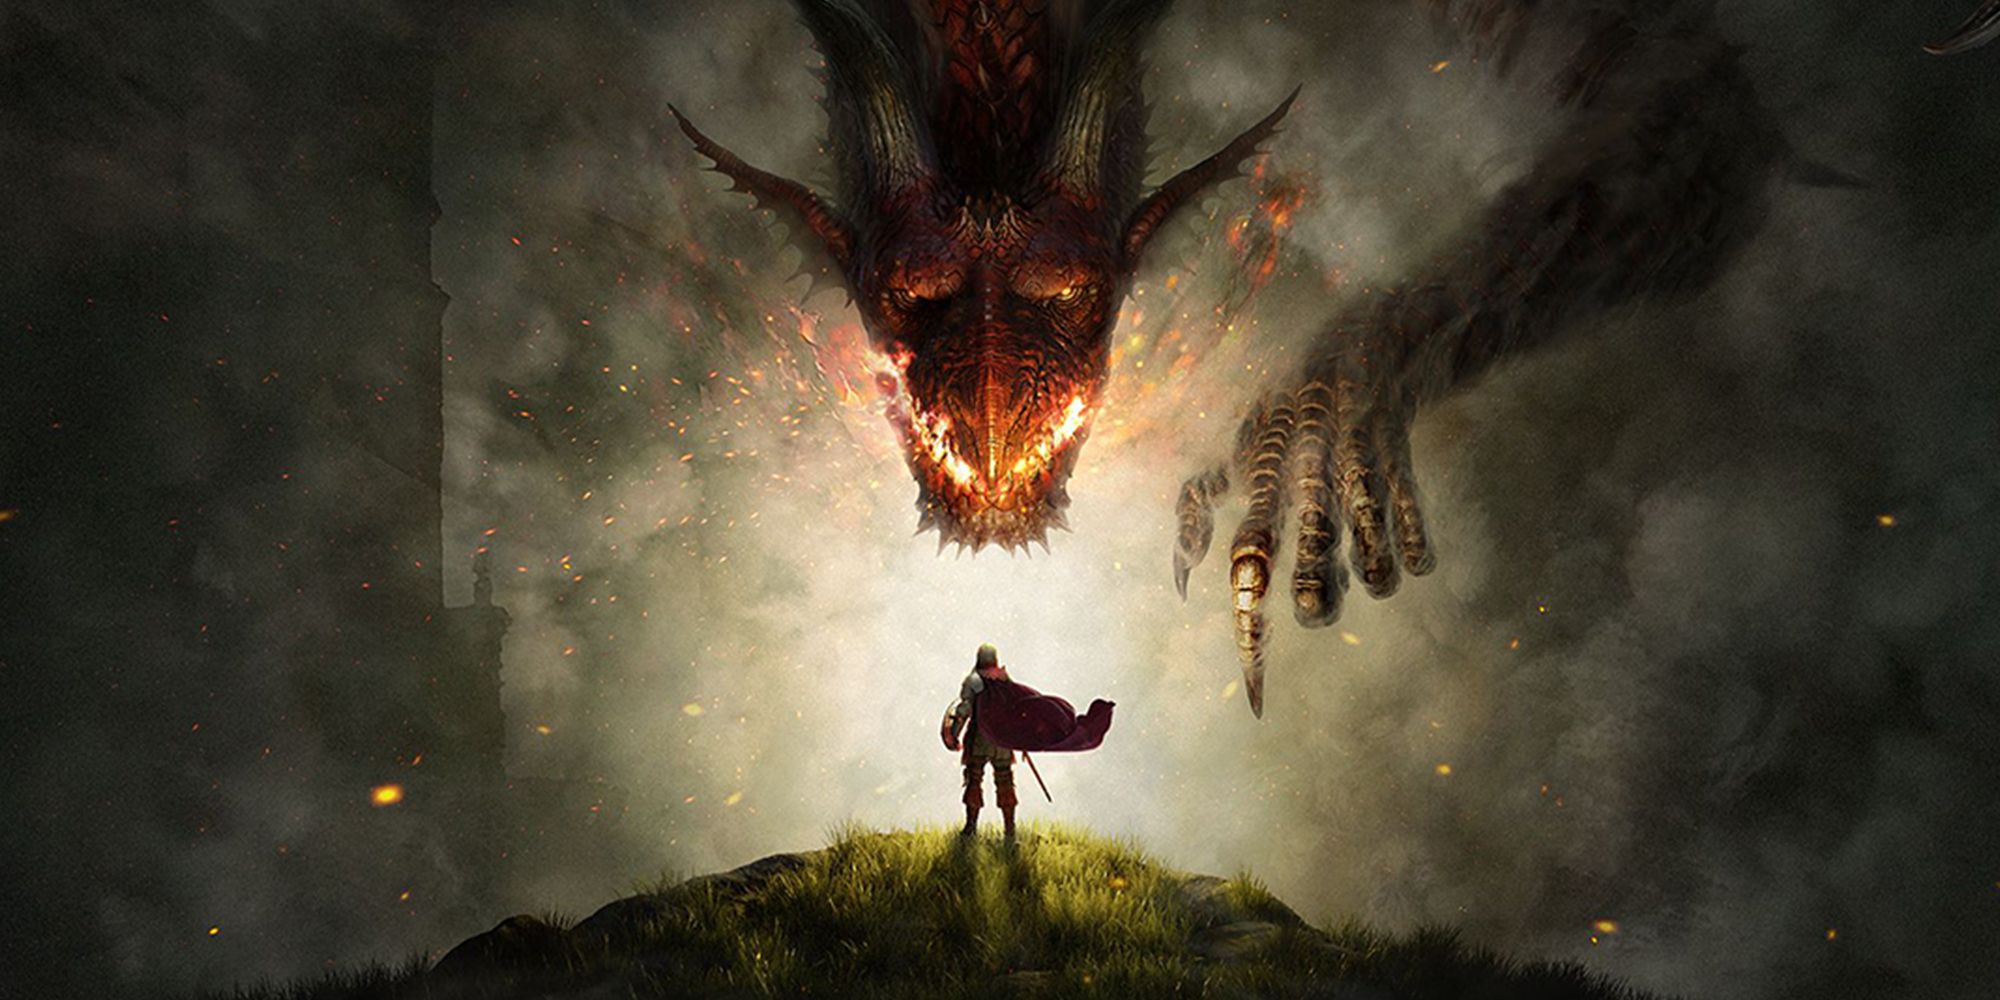 Dragons Dogma Promotional Art Showing The Dragon and the Arisen